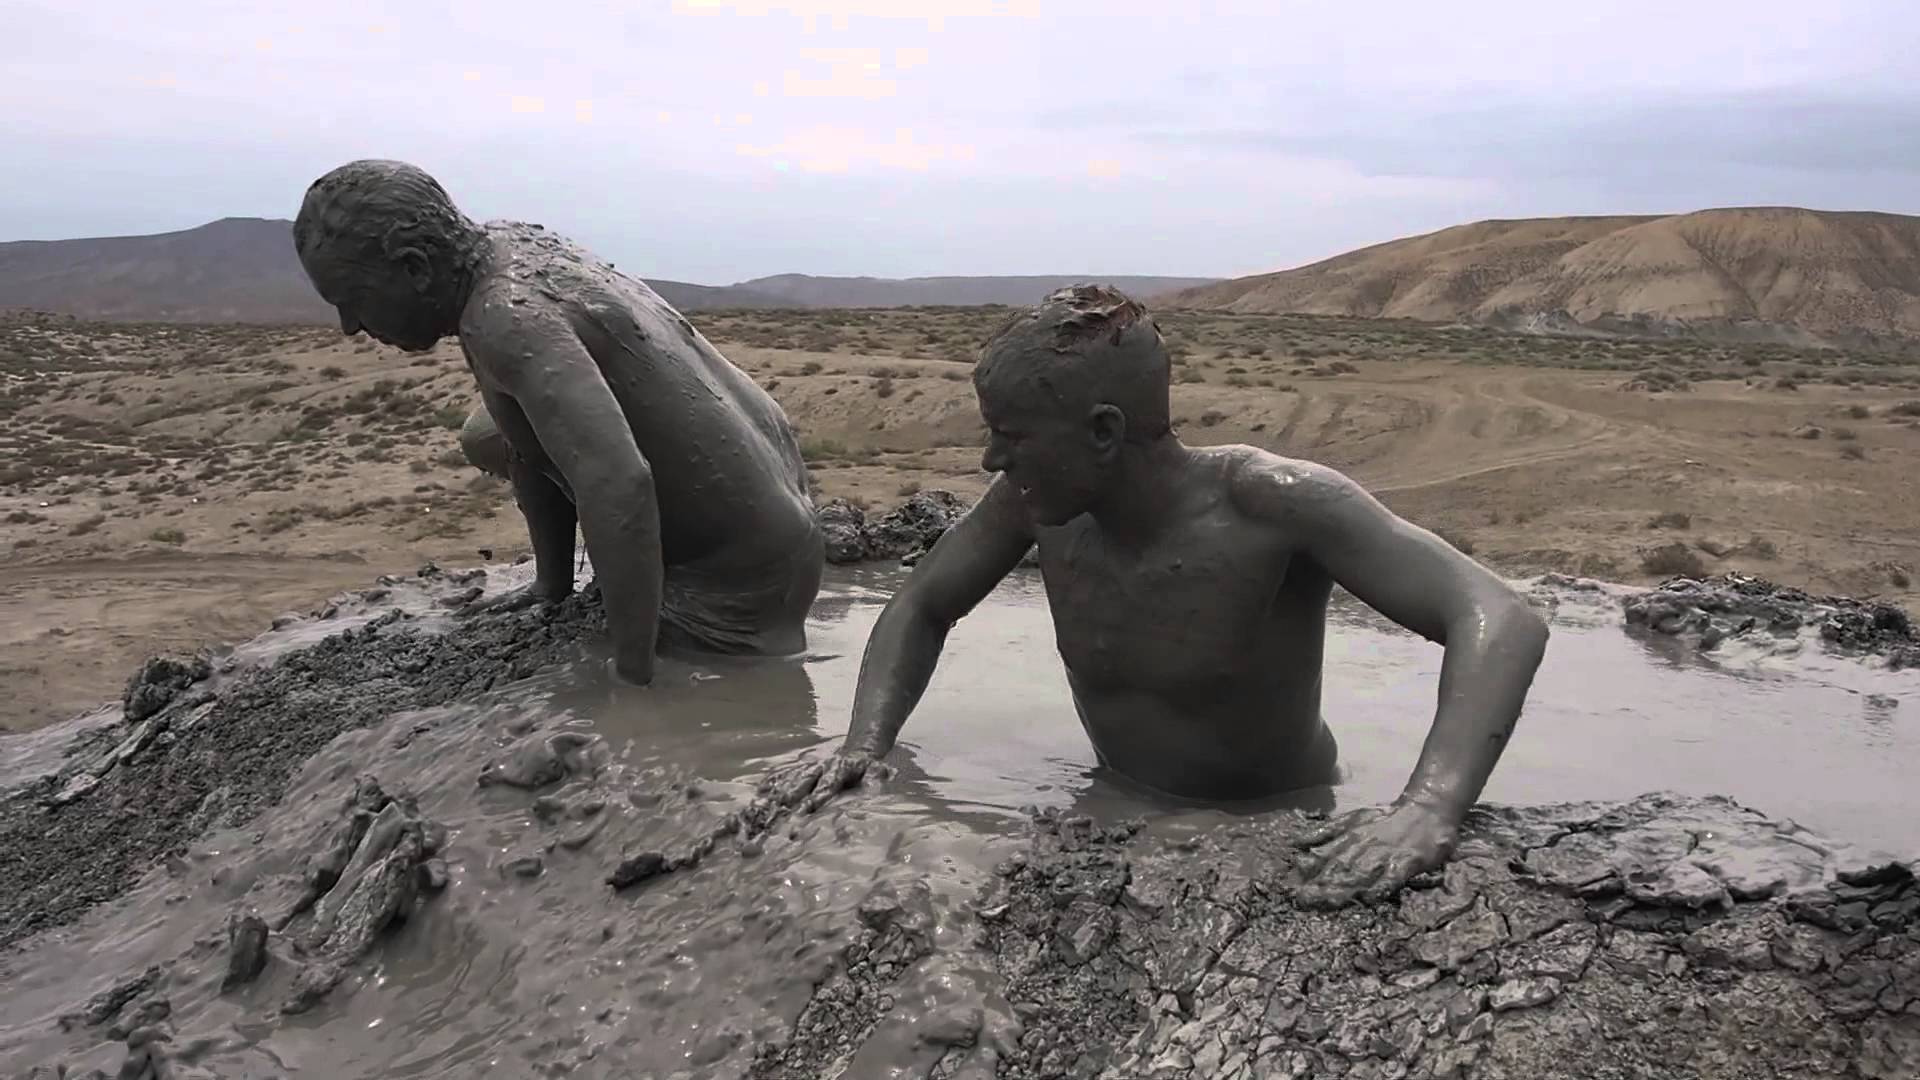 Diving into a Mud Volcano - YouTube